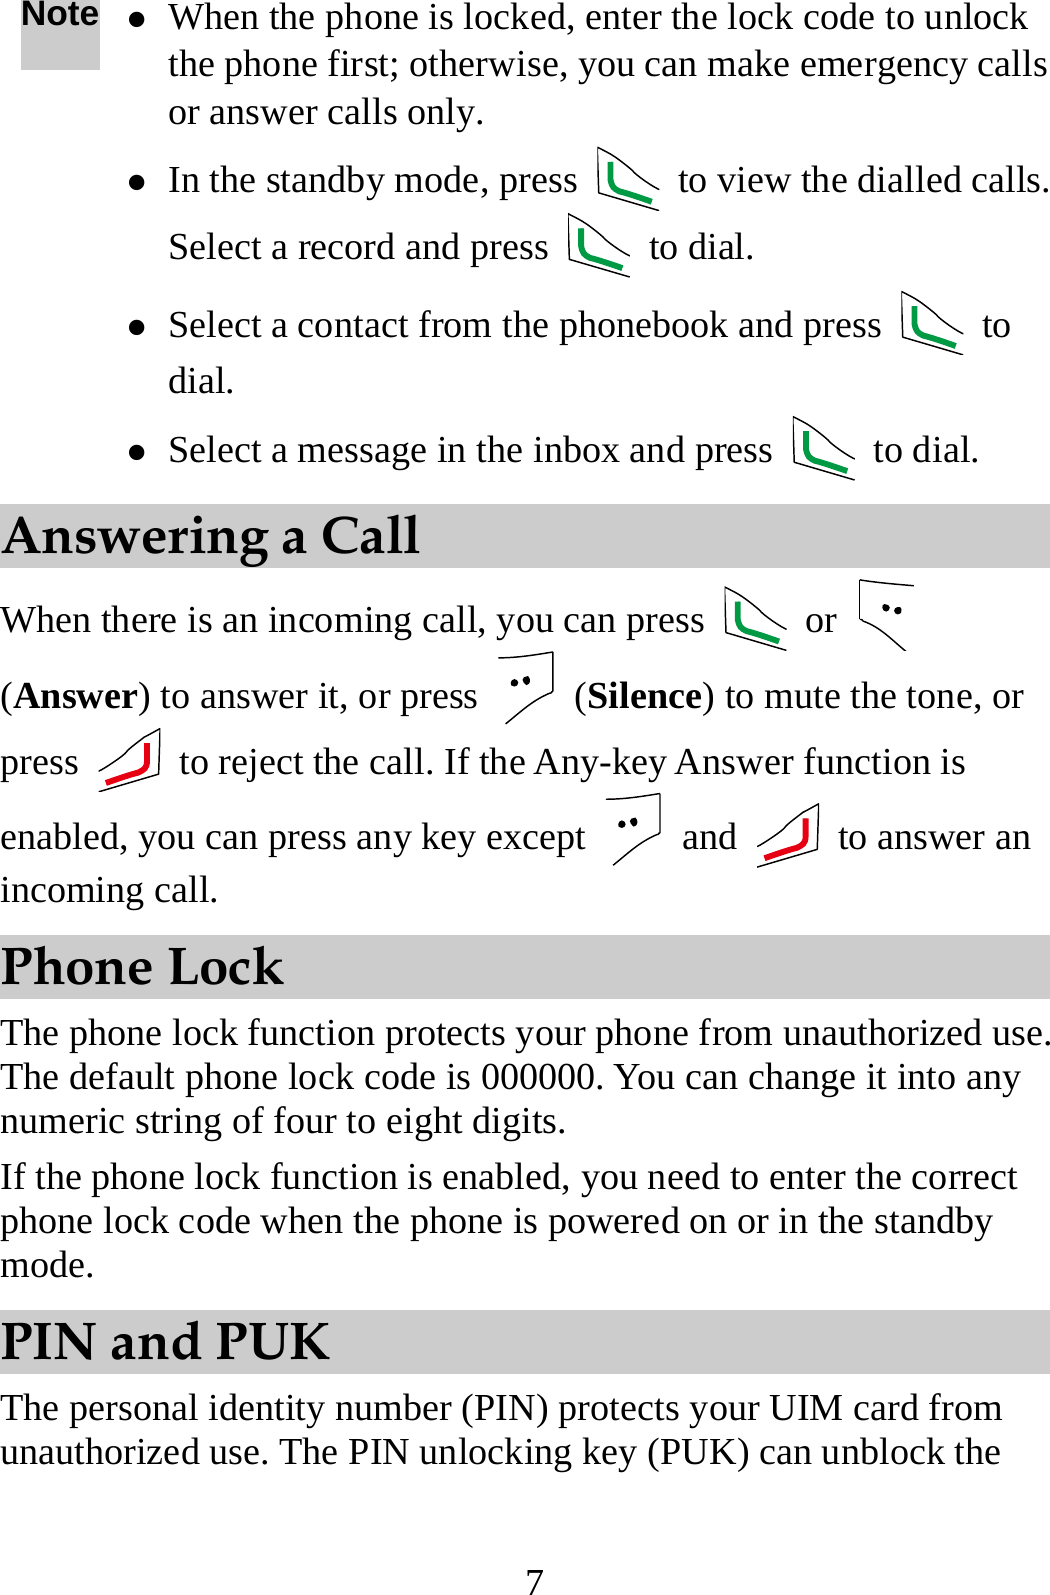 7 Note z When the phone is locked, enter the lock code to unlock the phone first; otherwise, you can make emergency calls or answer calls only. z In the standby mode, press    to view the dialled calls. Select a record and press   to dial. z Select a contact from the phonebook and press   to dial. z Select a message in the inbox and press   to dial. Answering a Call When there is an incoming call, you can press   or   (Answer) to answer it, or press   (Silence) to mute the tone, or press    to reject the call. If the Any-key Answer function is enabled, you can press any key except   and   to answer an incoming call. Phone Lock The phone lock function protects your phone from unauthorized use. The default phone lock code is 000000. You can change it into any numeric string of four to eight digits. If the phone lock function is enabled, you need to enter the correct phone lock code when the phone is powered on or in the standby mode. PIN and PUK The personal identity number (PIN) protects your UIM card from unauthorized use. The PIN unlocking key (PUK) can unblock the 